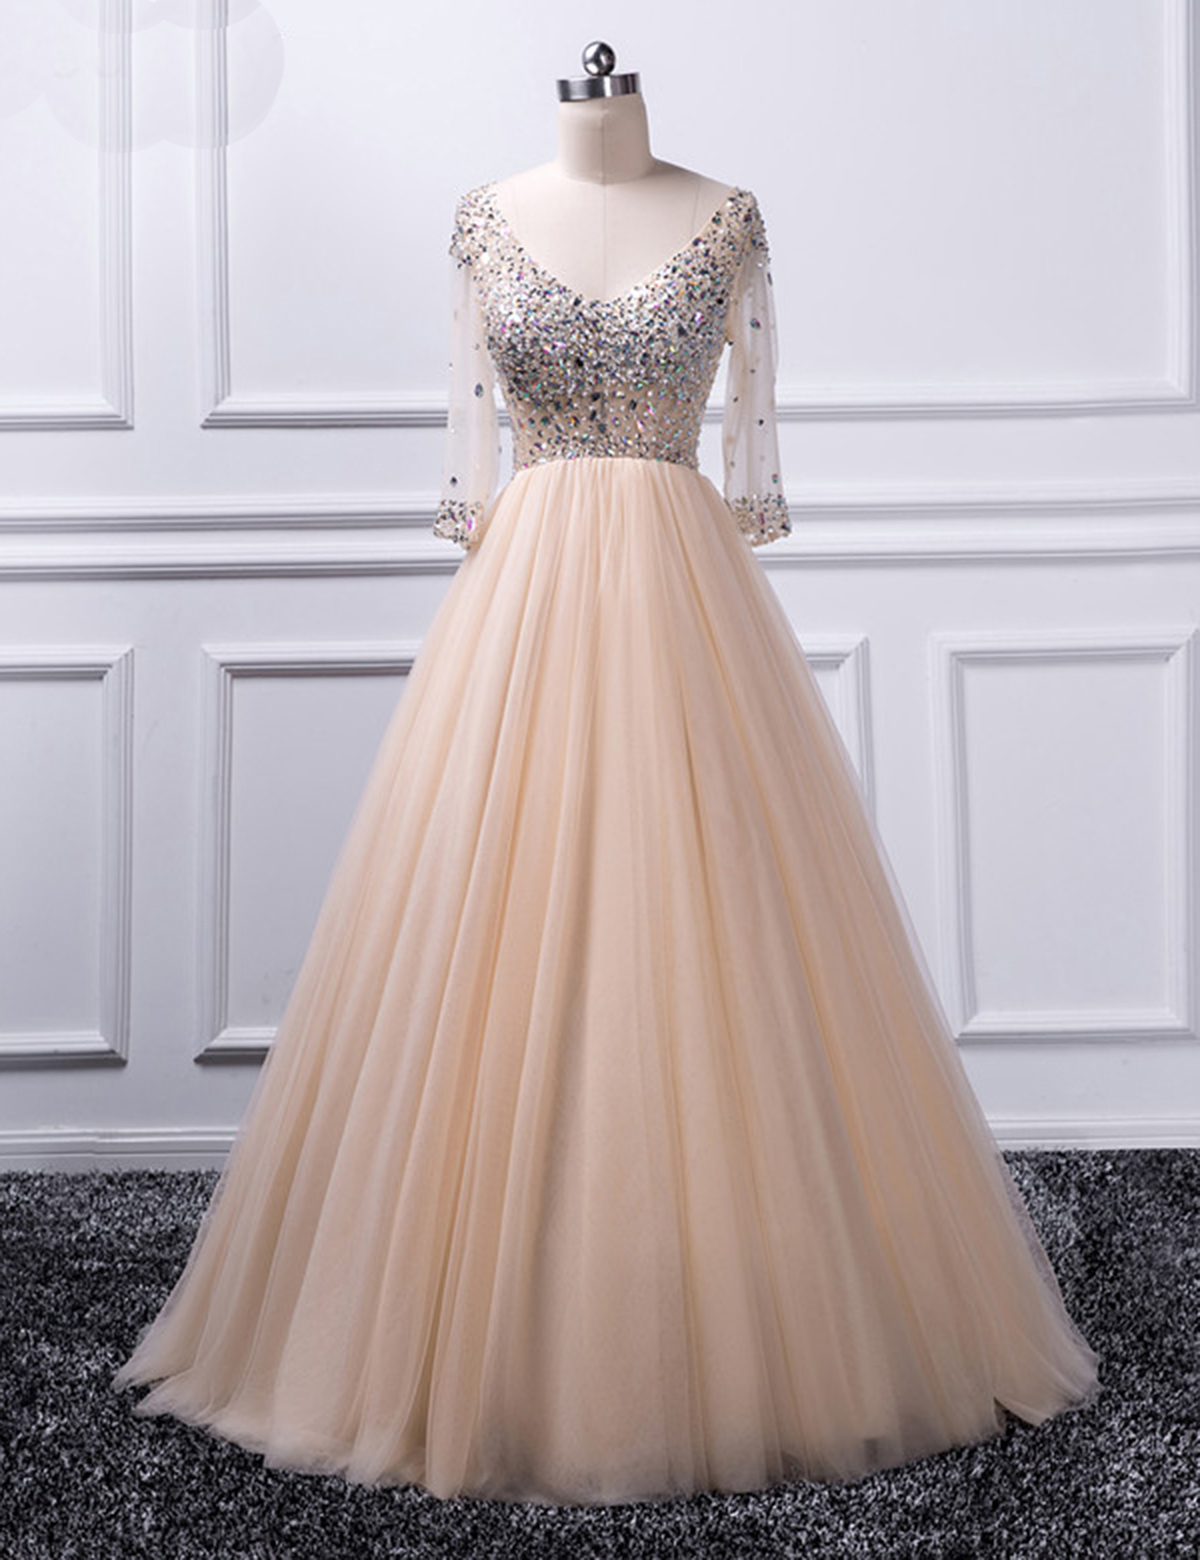 A Line Champagne Prom Dress With Sleeves,long V Neck Tulle Prom Gown With Beading, Glitter Evening Dress With Crystals, P261